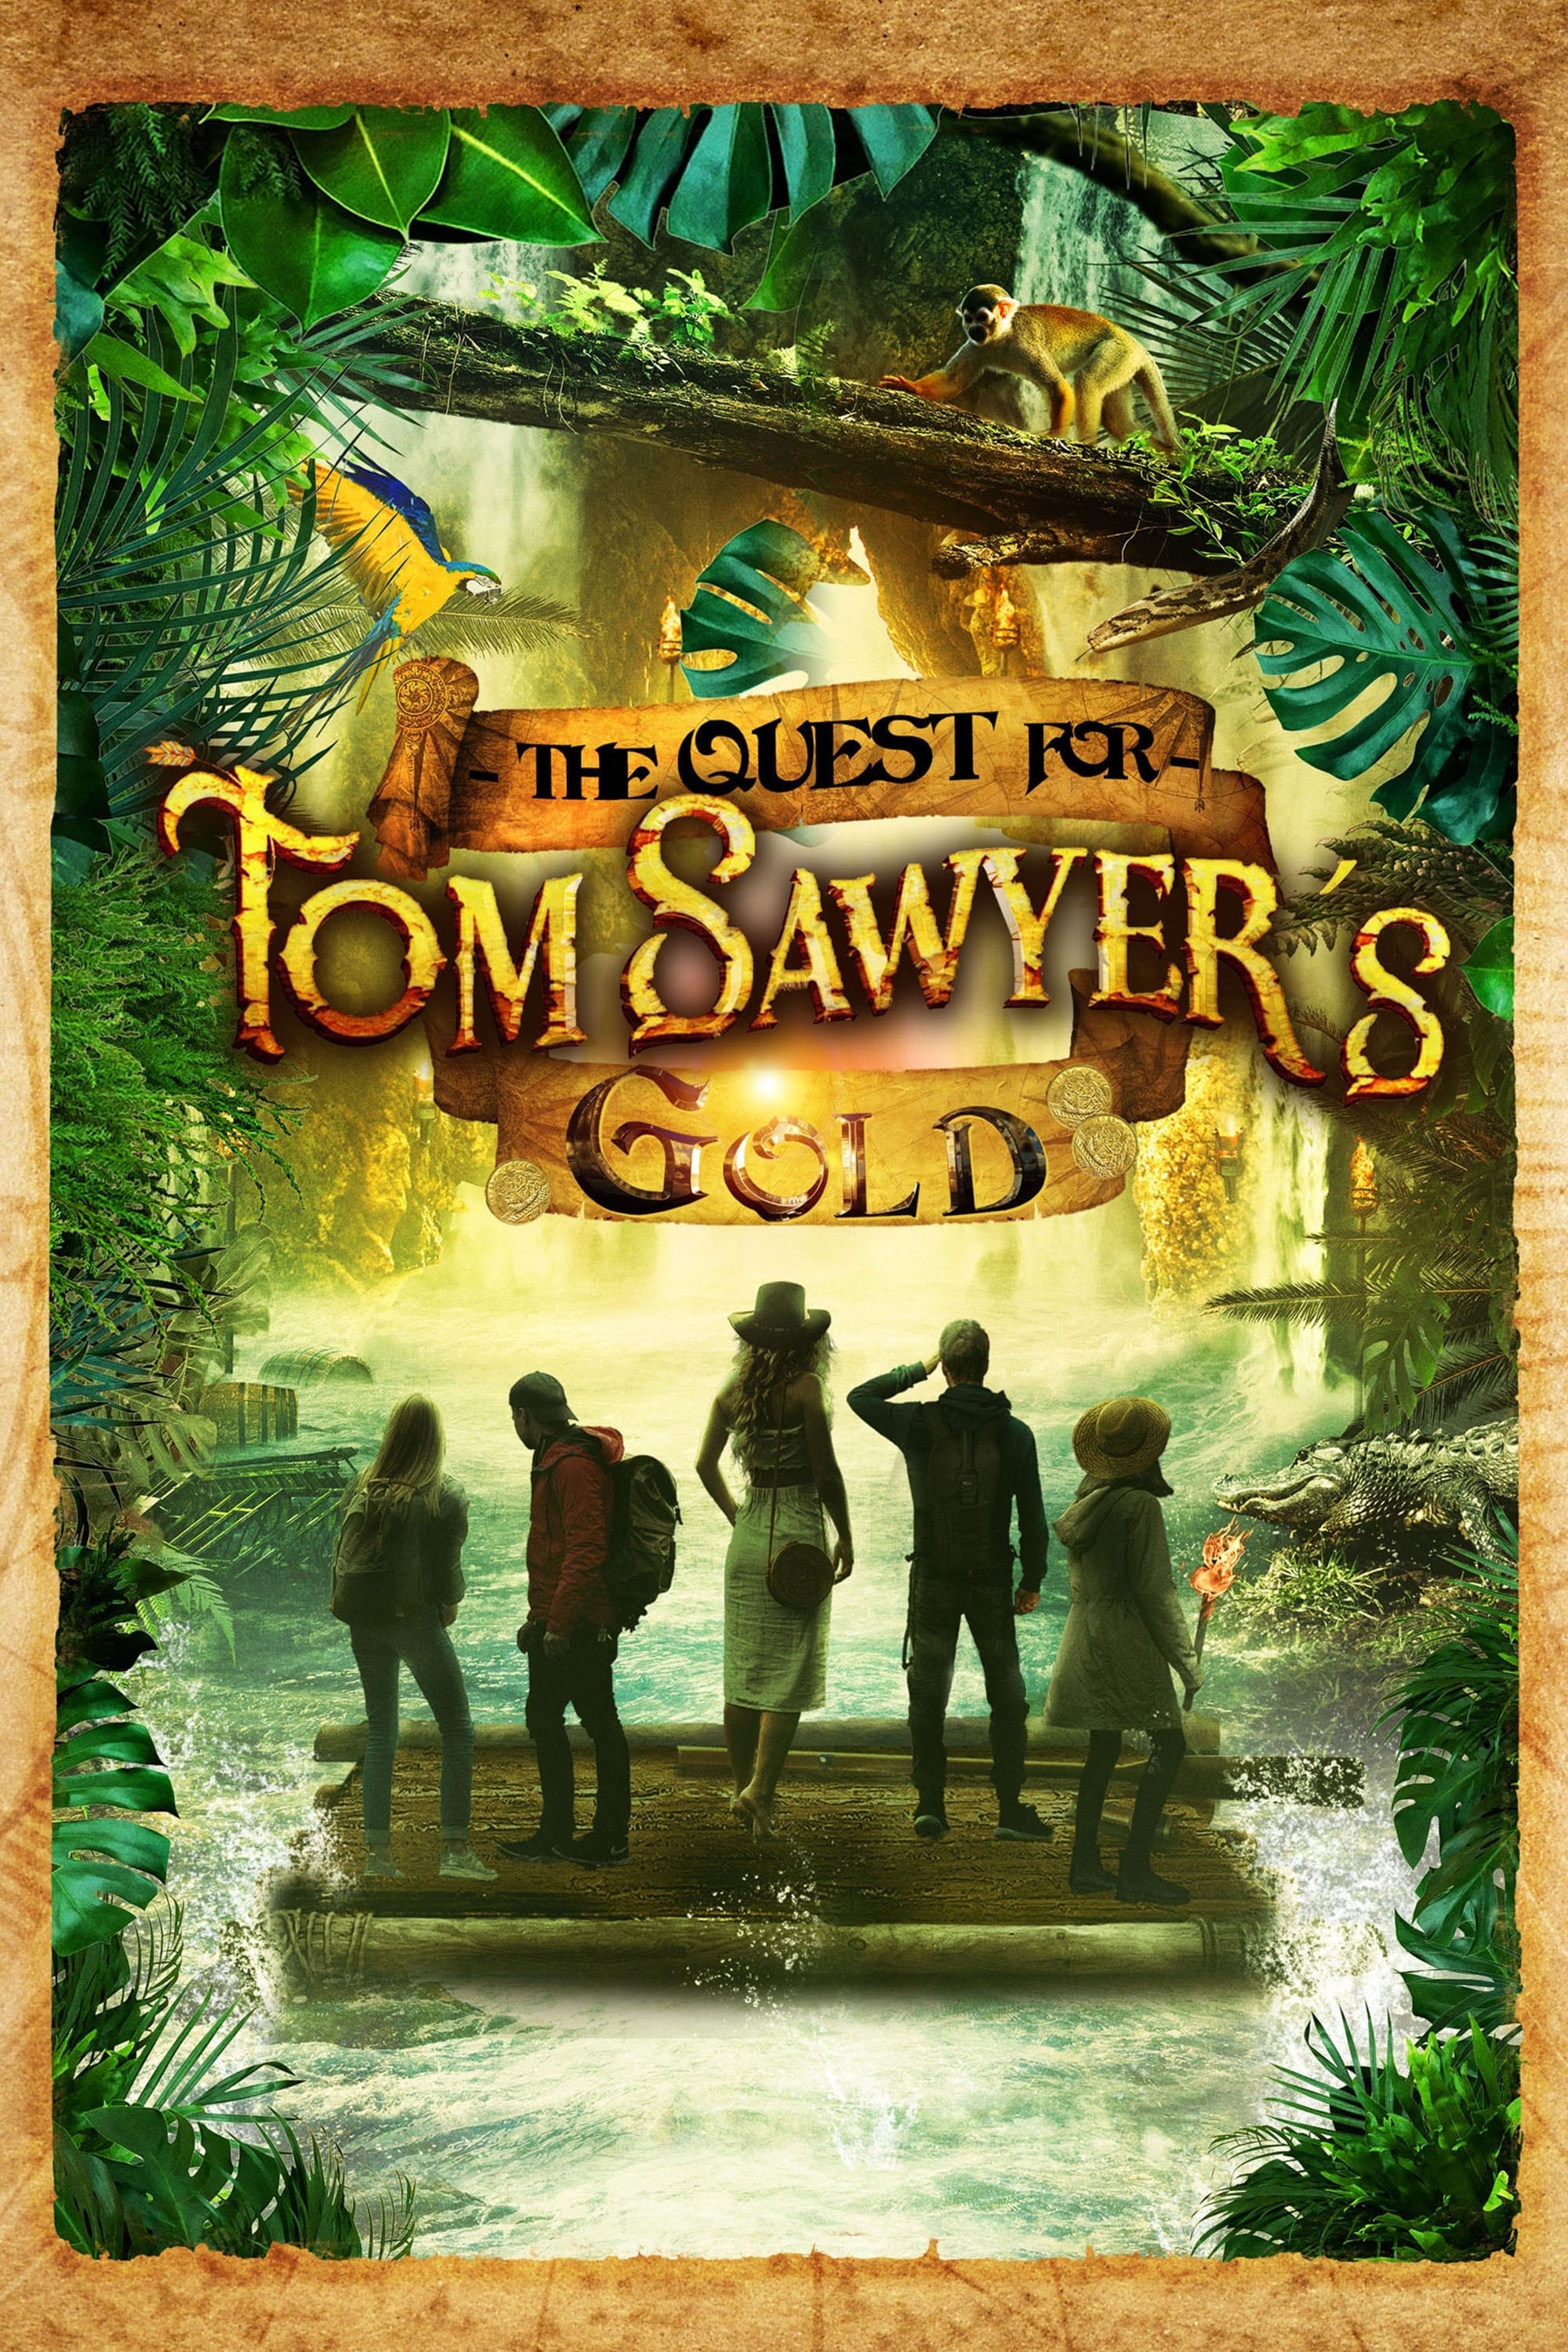 The Quest for Tom Sawyer's Gold film